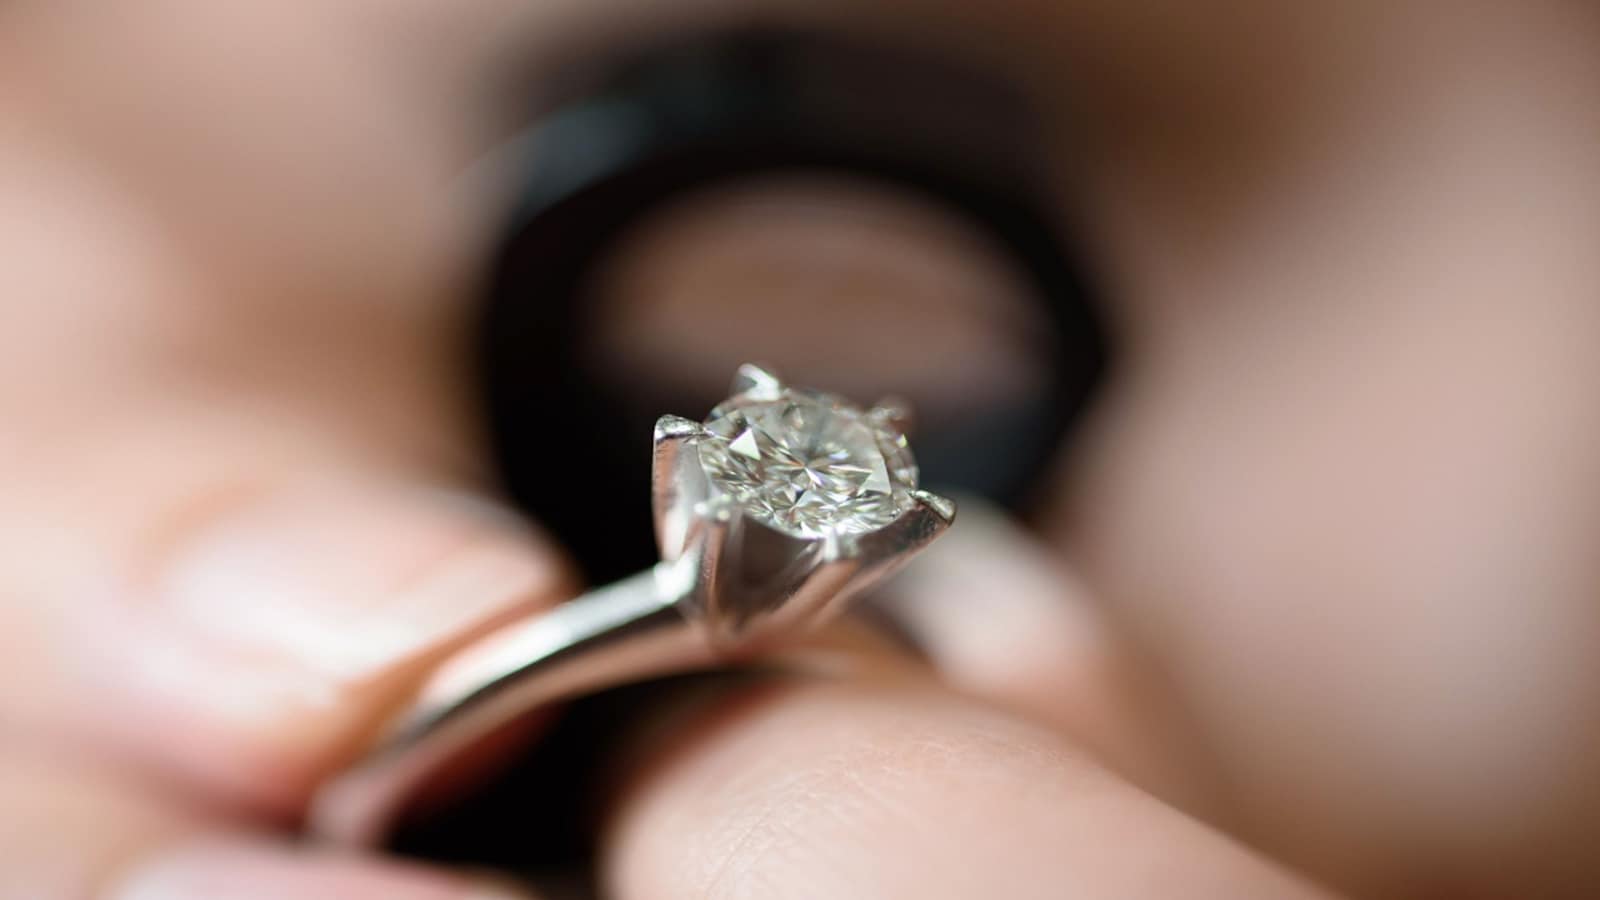 India's bet on lab-grown diamonds: What will it take to lead the world?